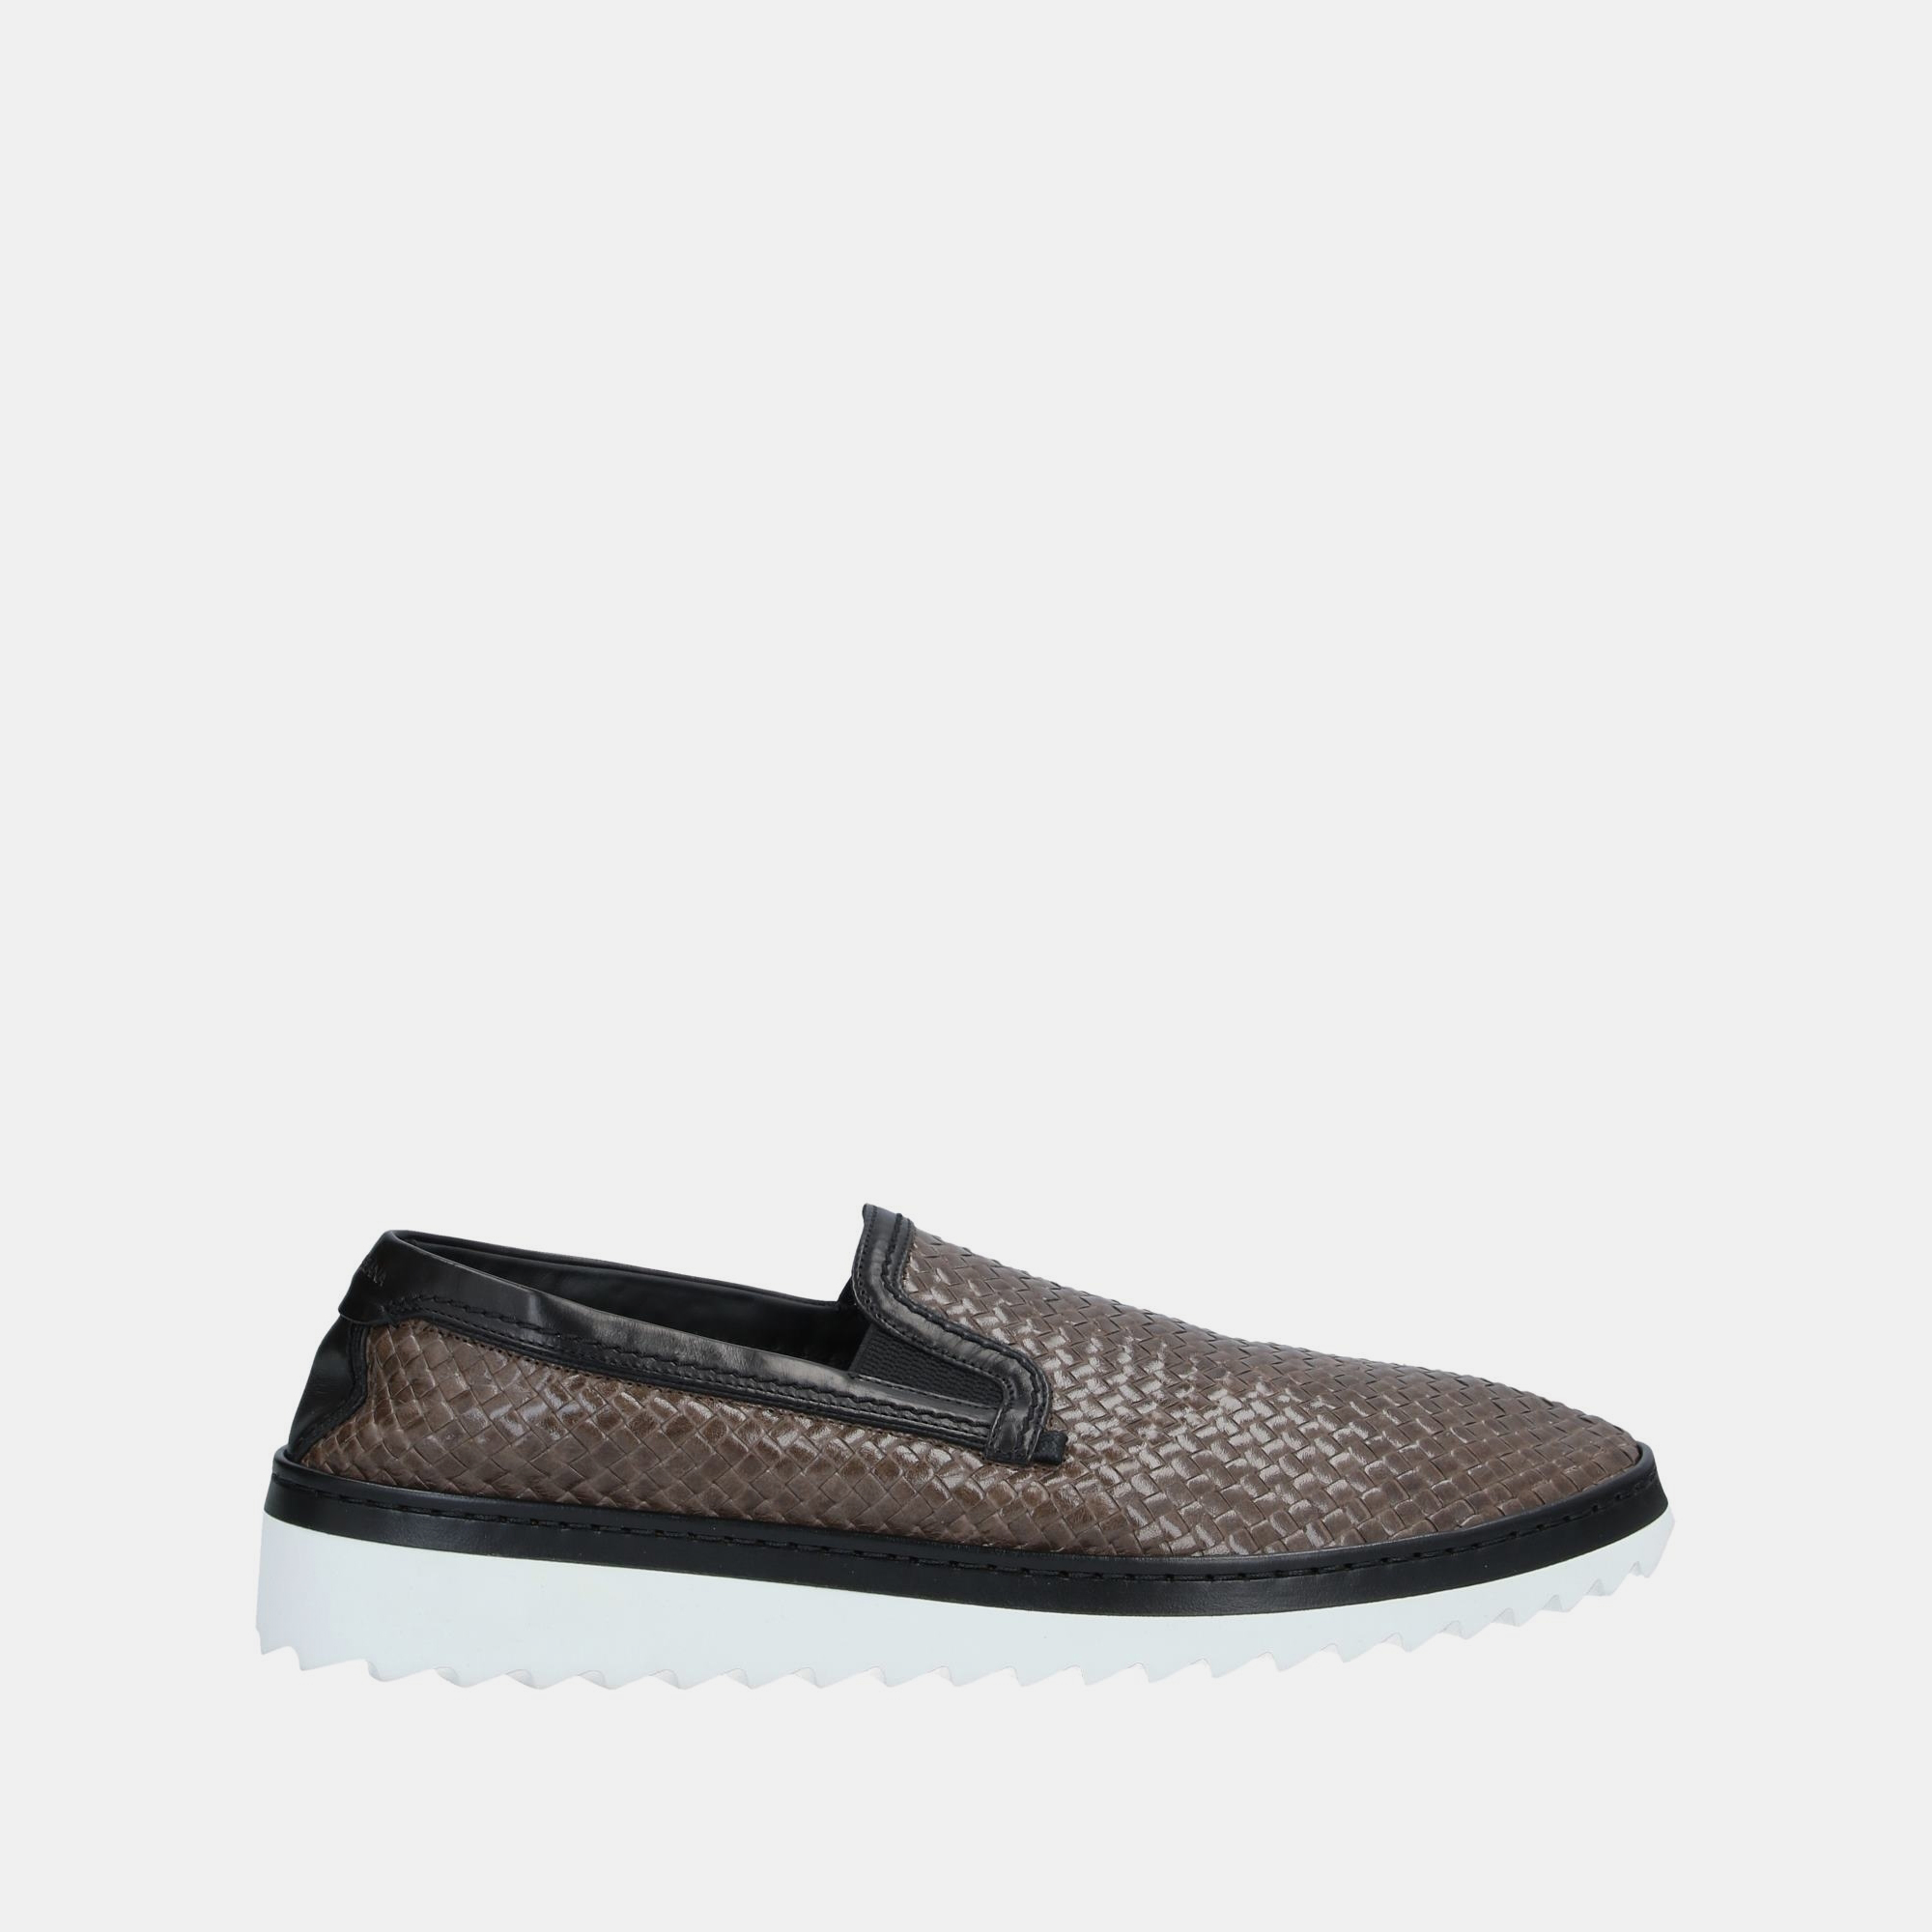 Dolce & gabbana woven leather loafers 44